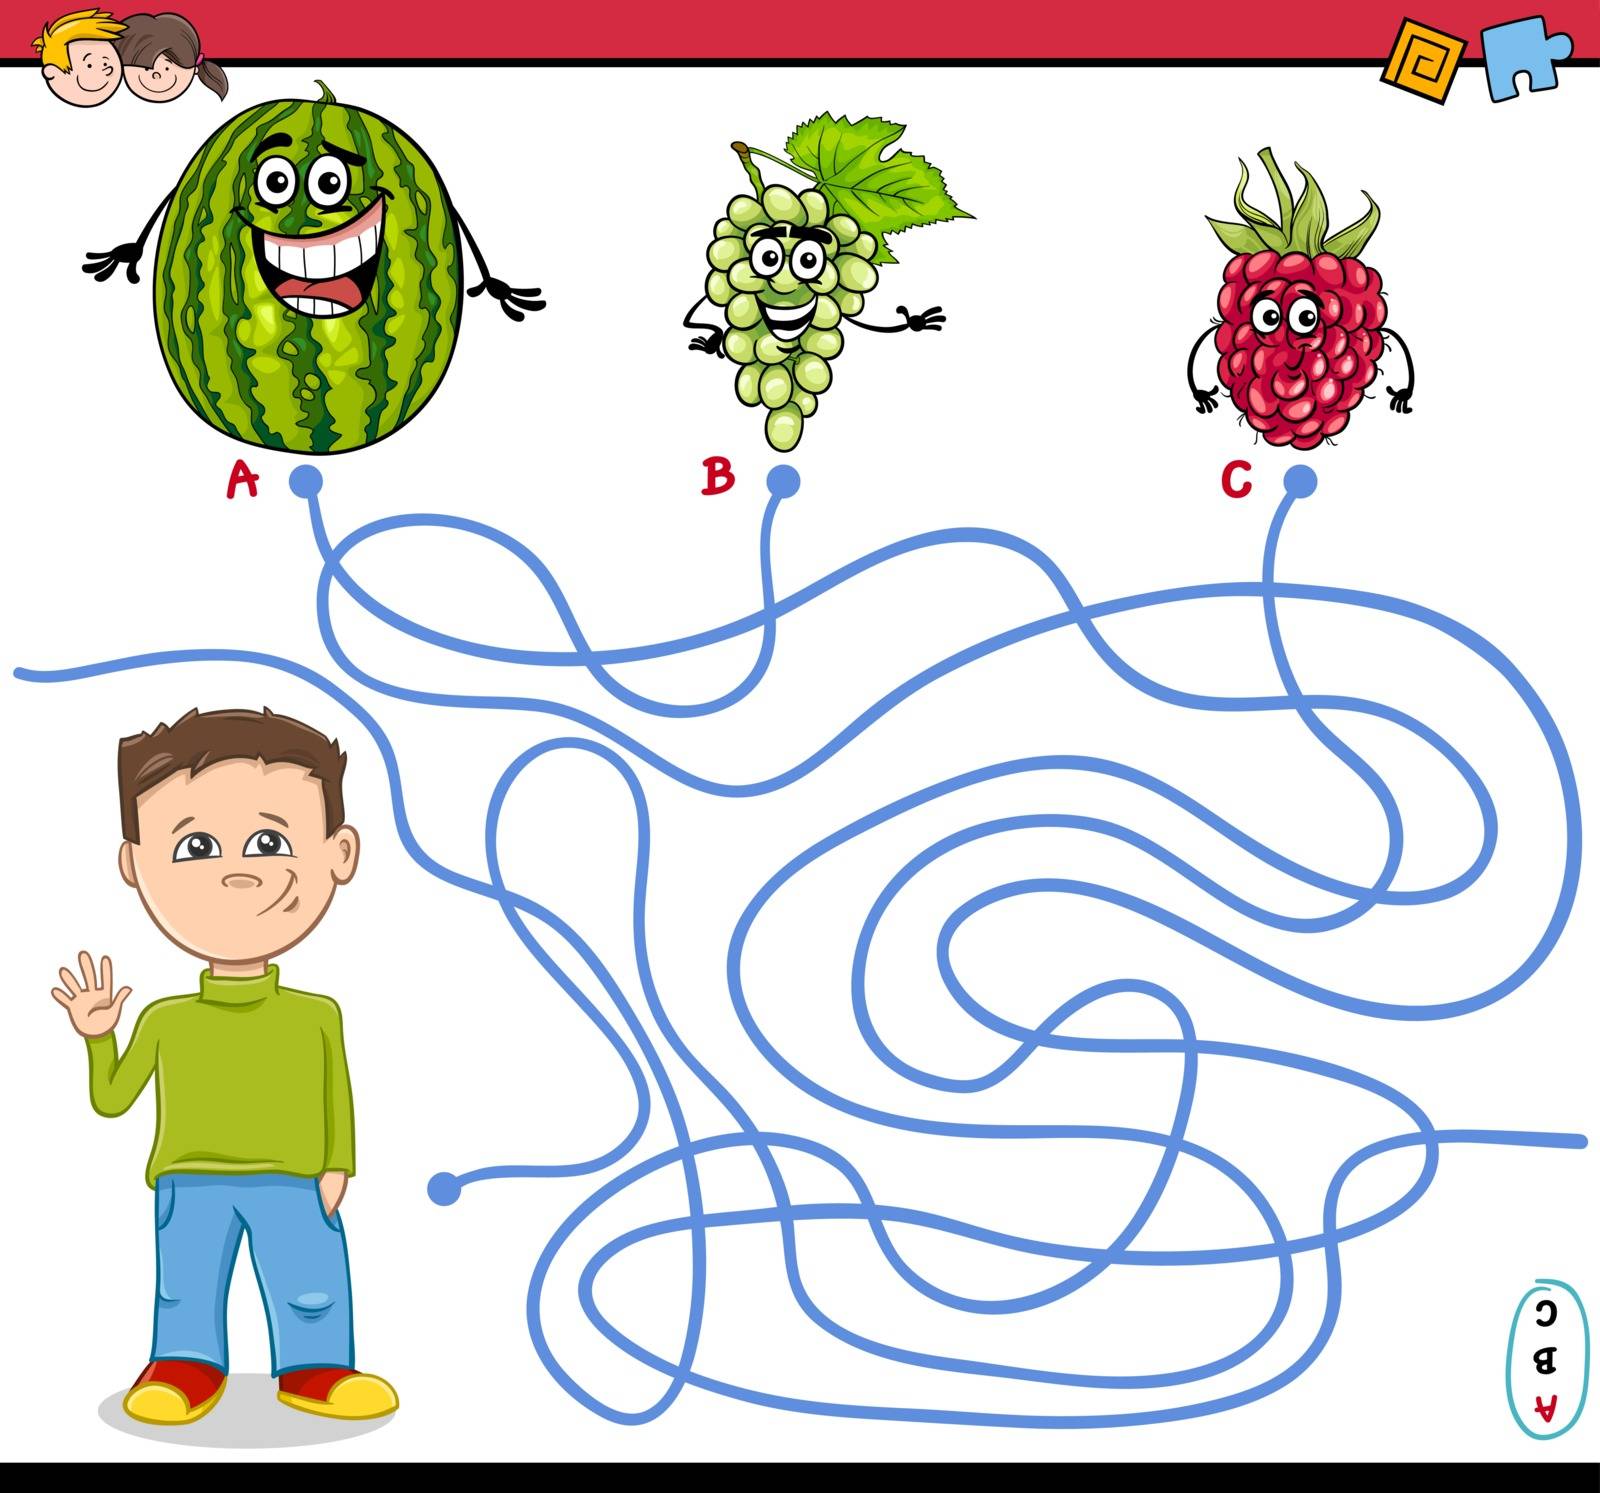 Cartoon Illustration of Educational Paths or Maze Puzzle Activity with Kid Boy and Fruits